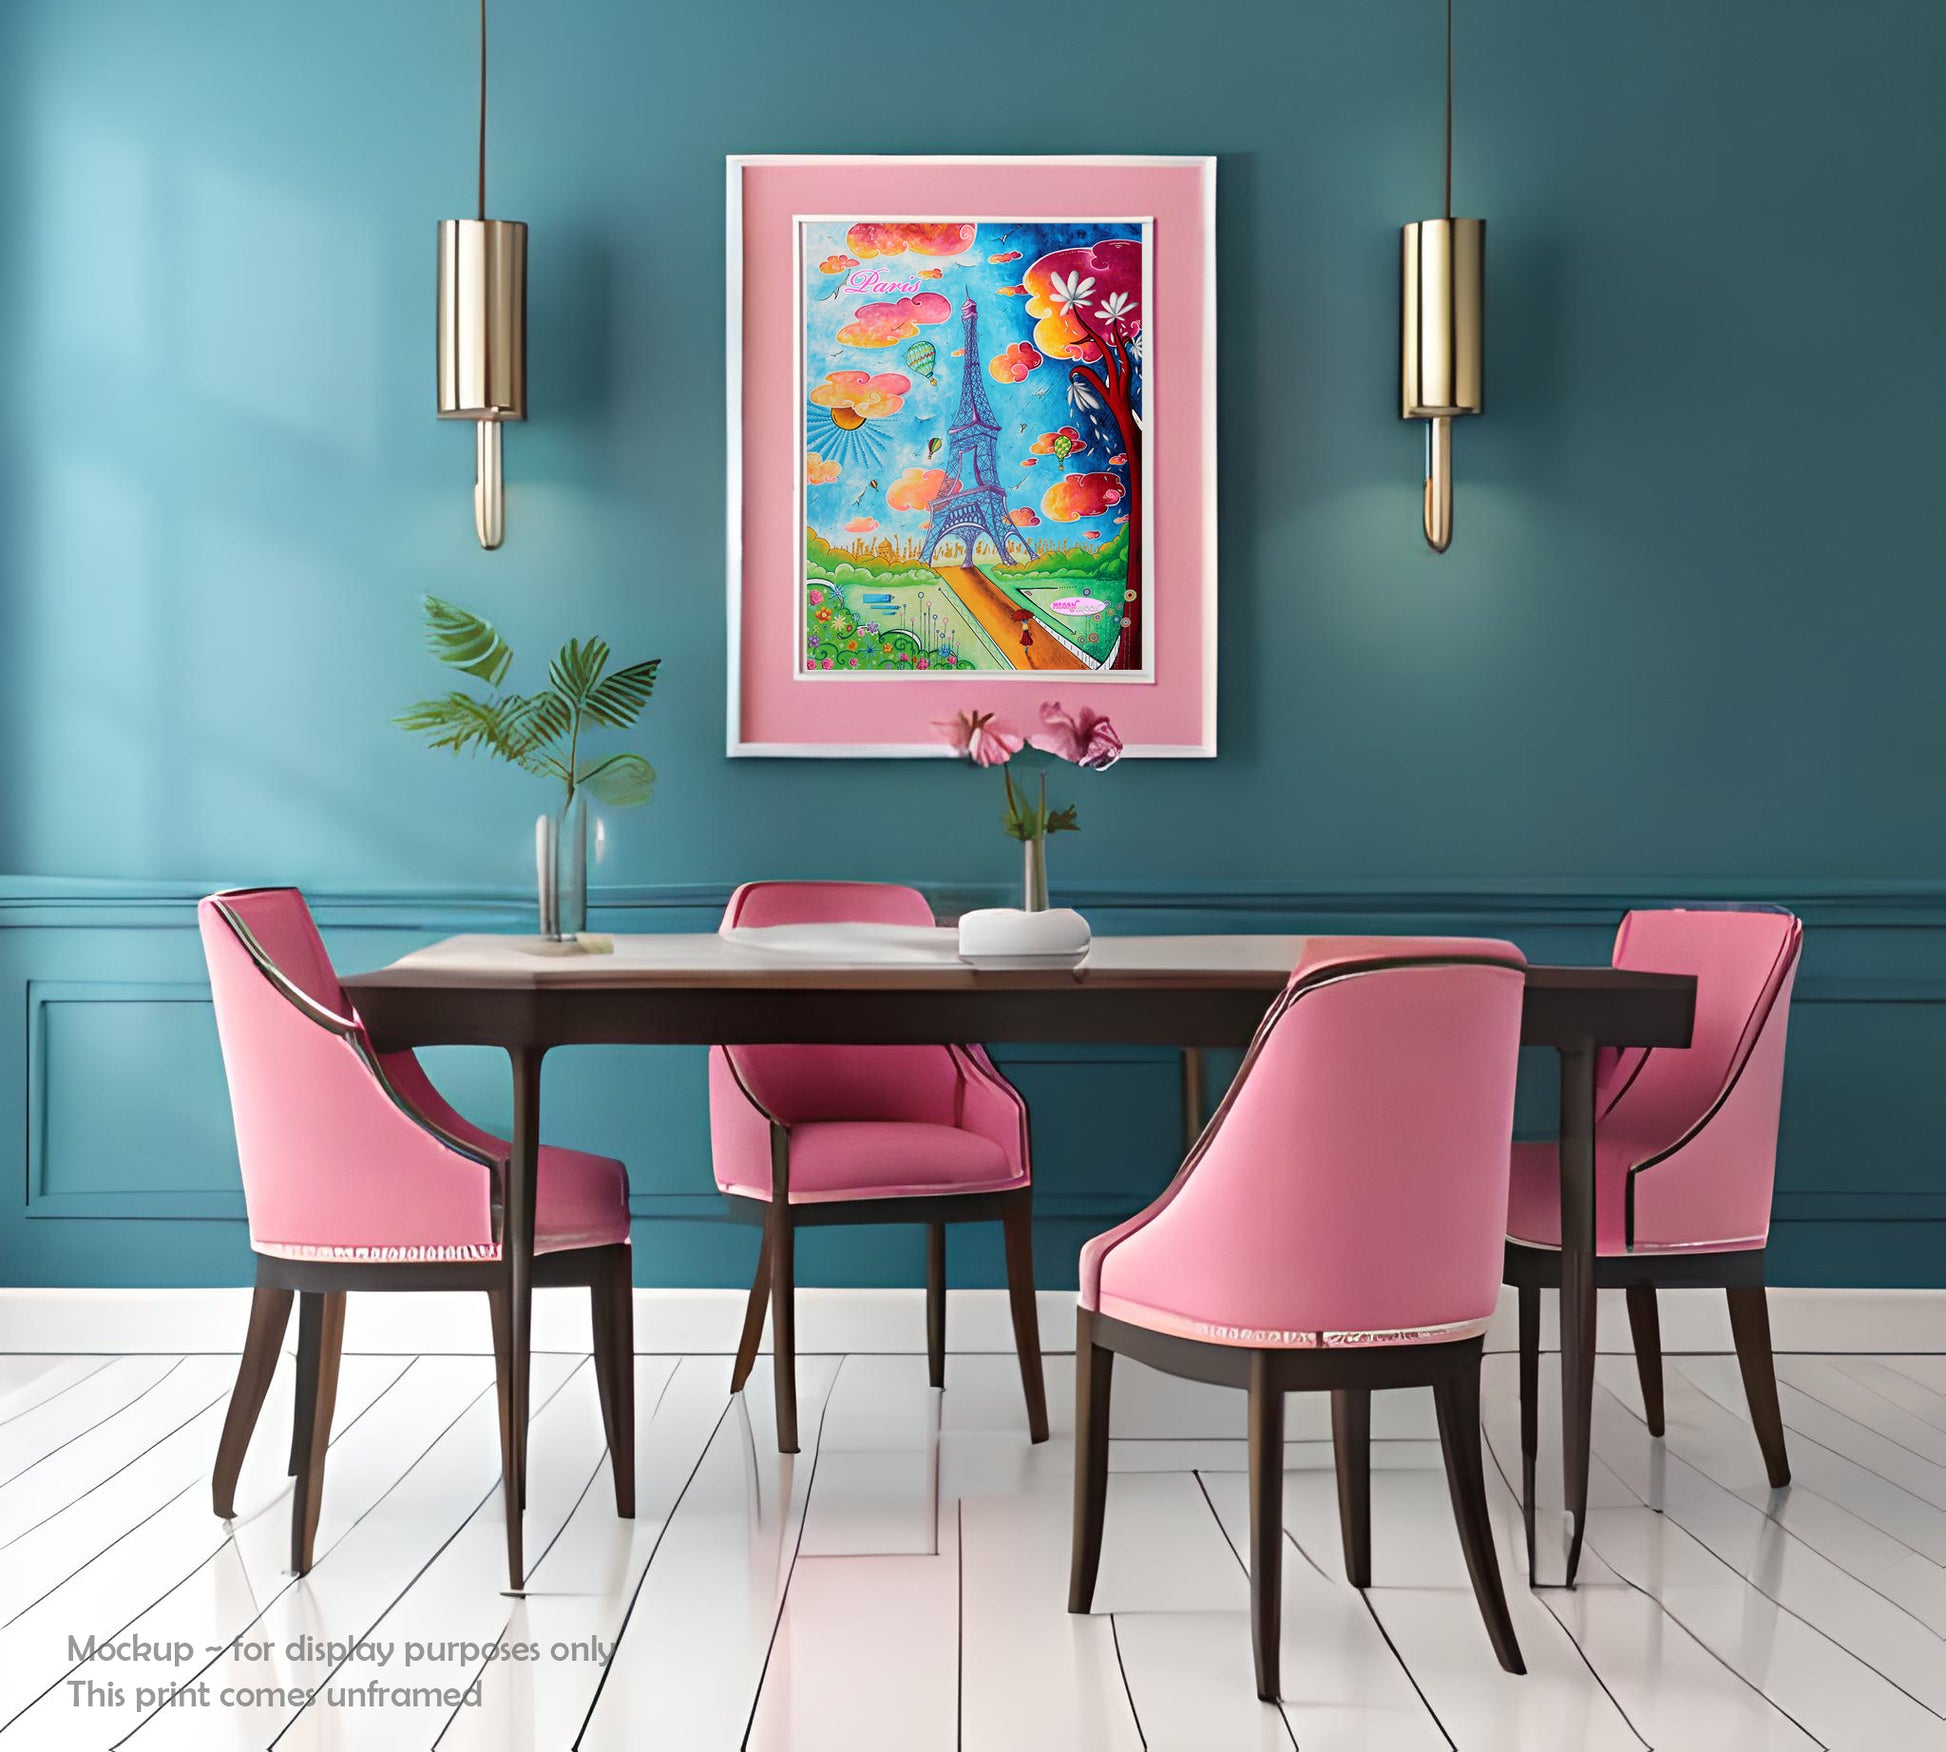 framed pop art maximalist style travle poster print of the eiffel tower Paris France painting by MeganAroon in a chic pink and aqua dining room setting